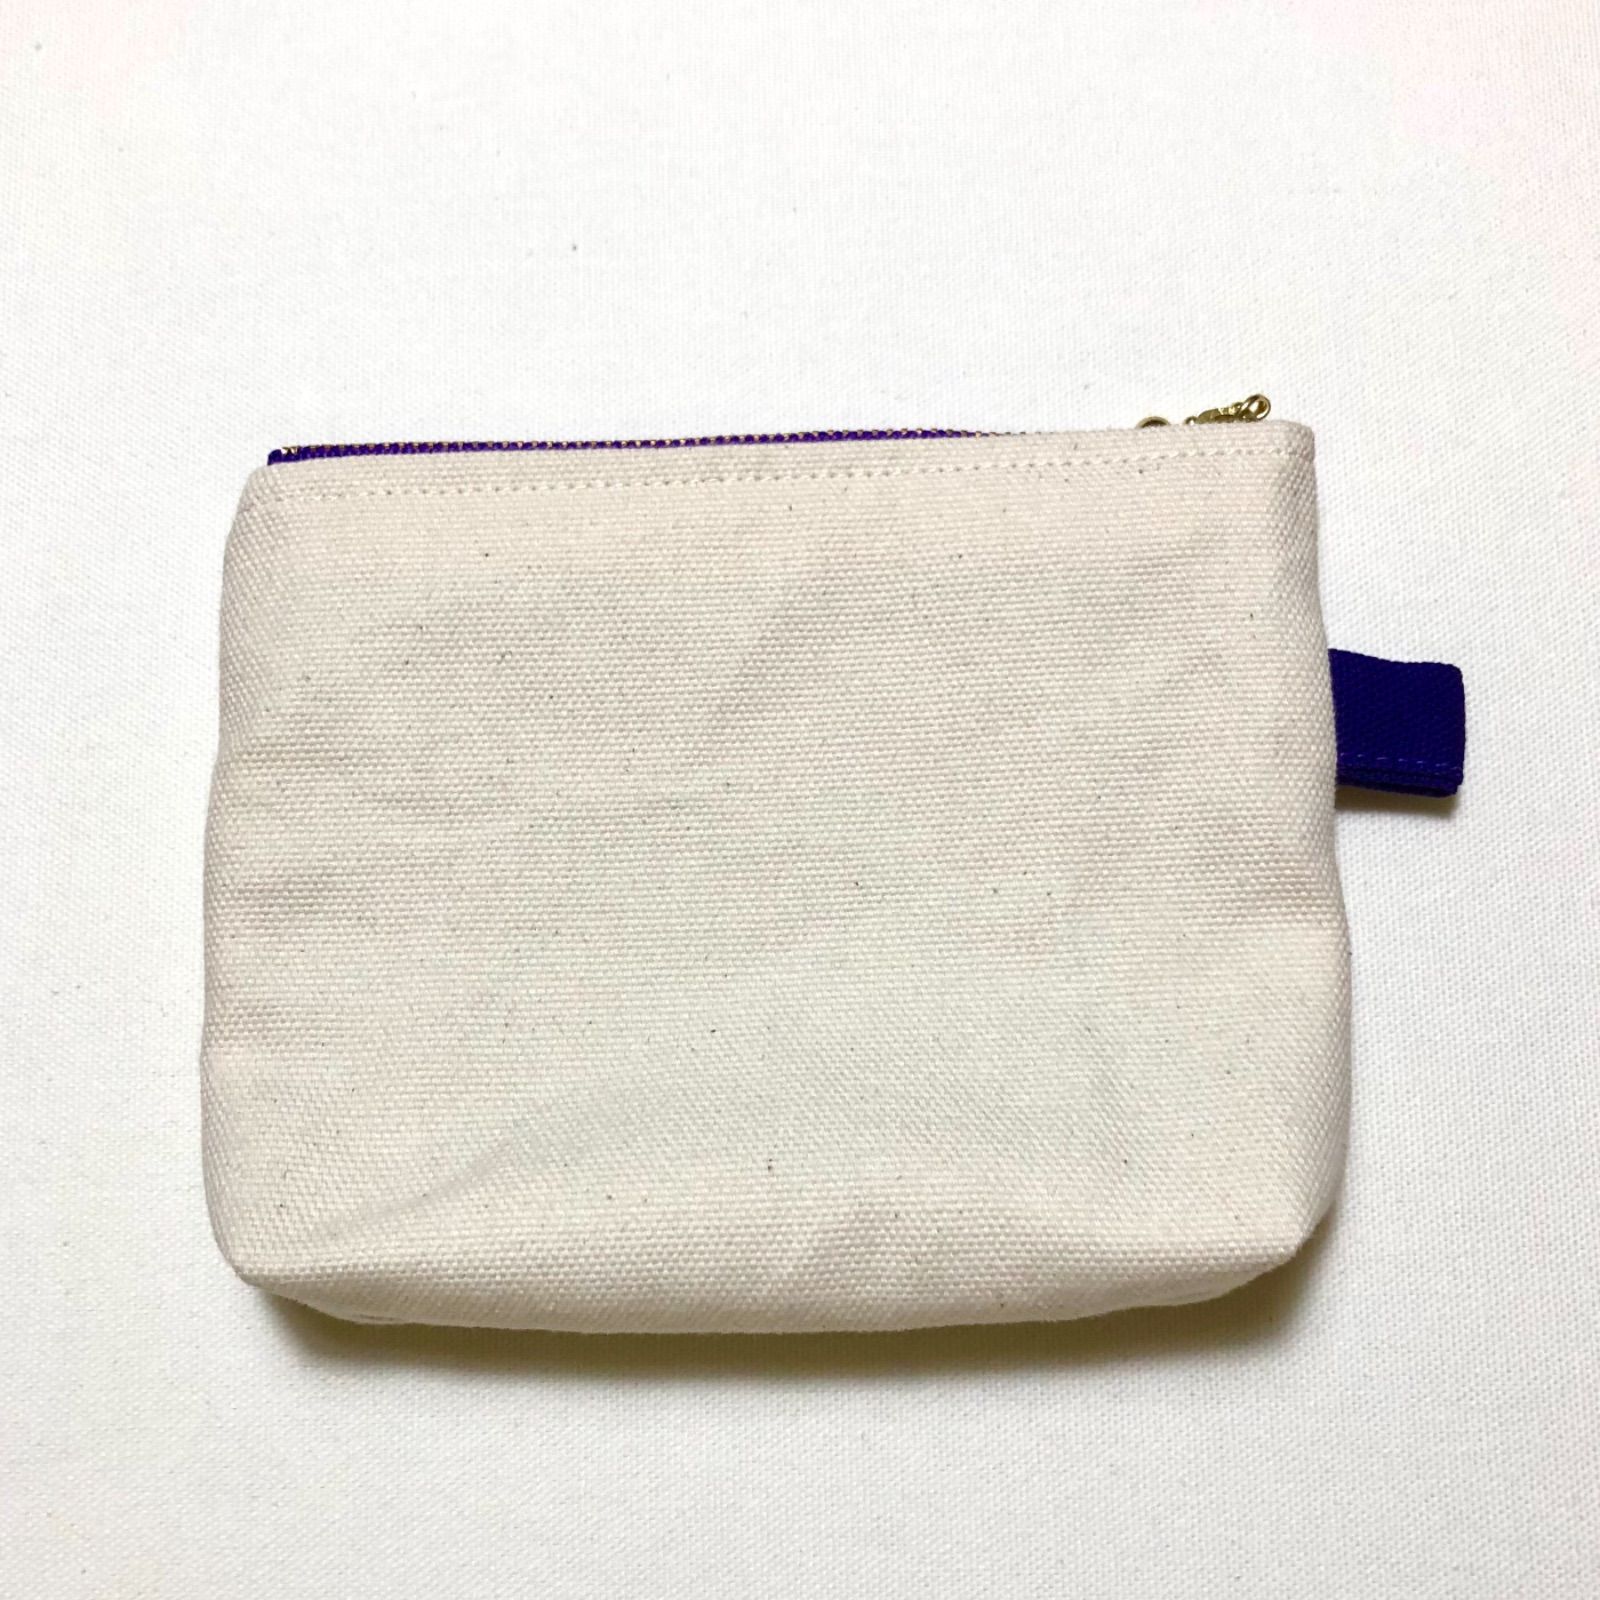 Smile Card Pouch